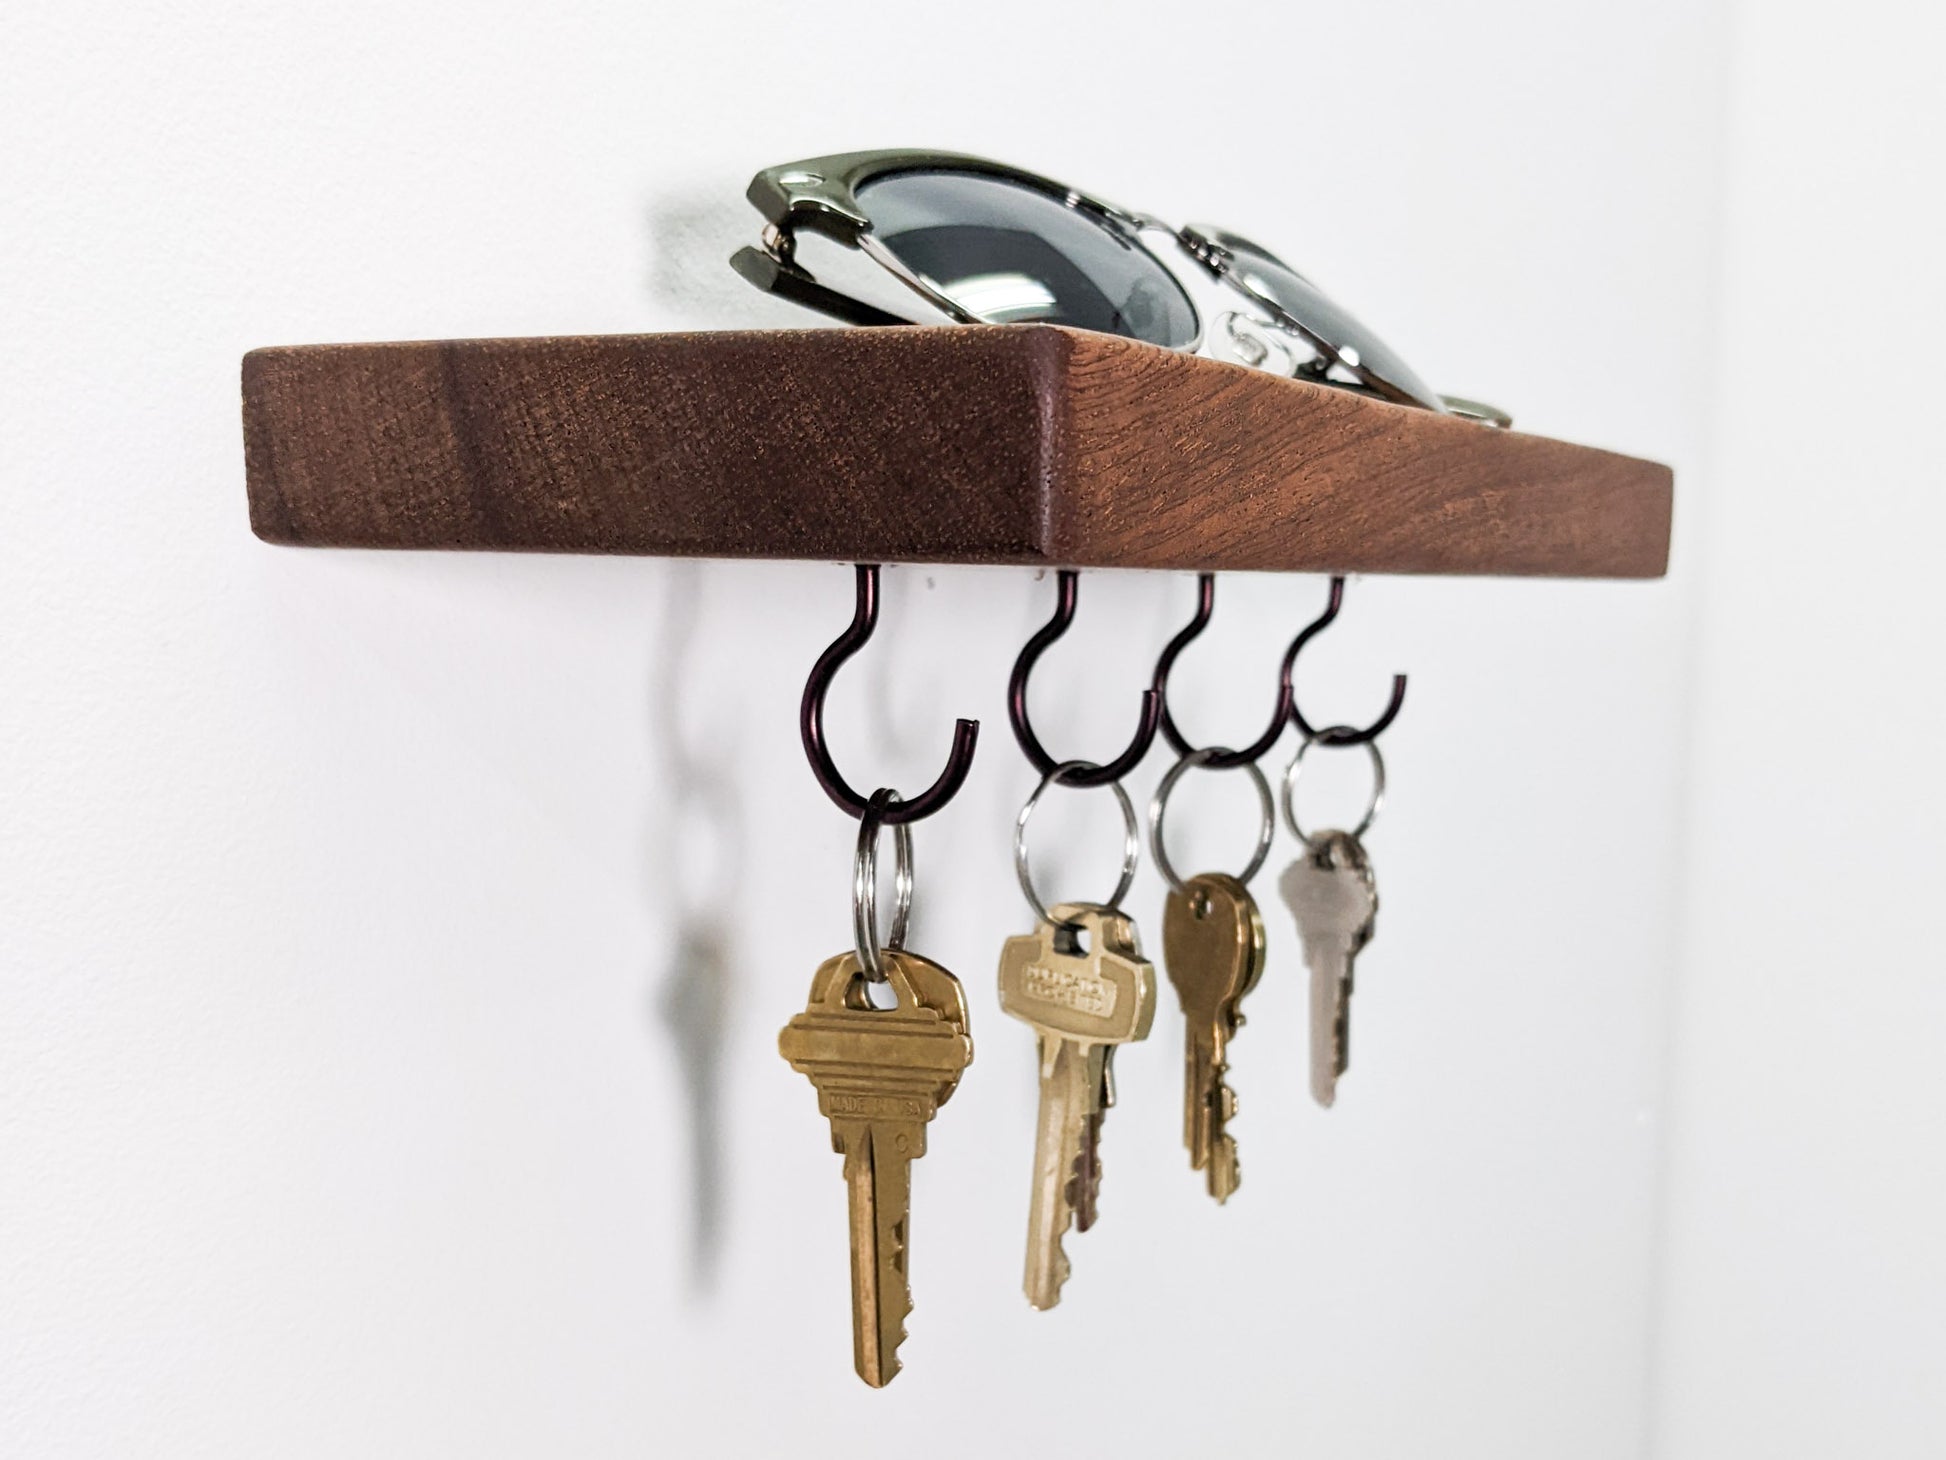 Four black key hooks hang securely from a wall-mounted floating mahogany shelf. Four keys are bronze, four are silver. The keys cast a slight shadow onto the white wall behind them. On top of the shelf sits a pair of sunglasses. 